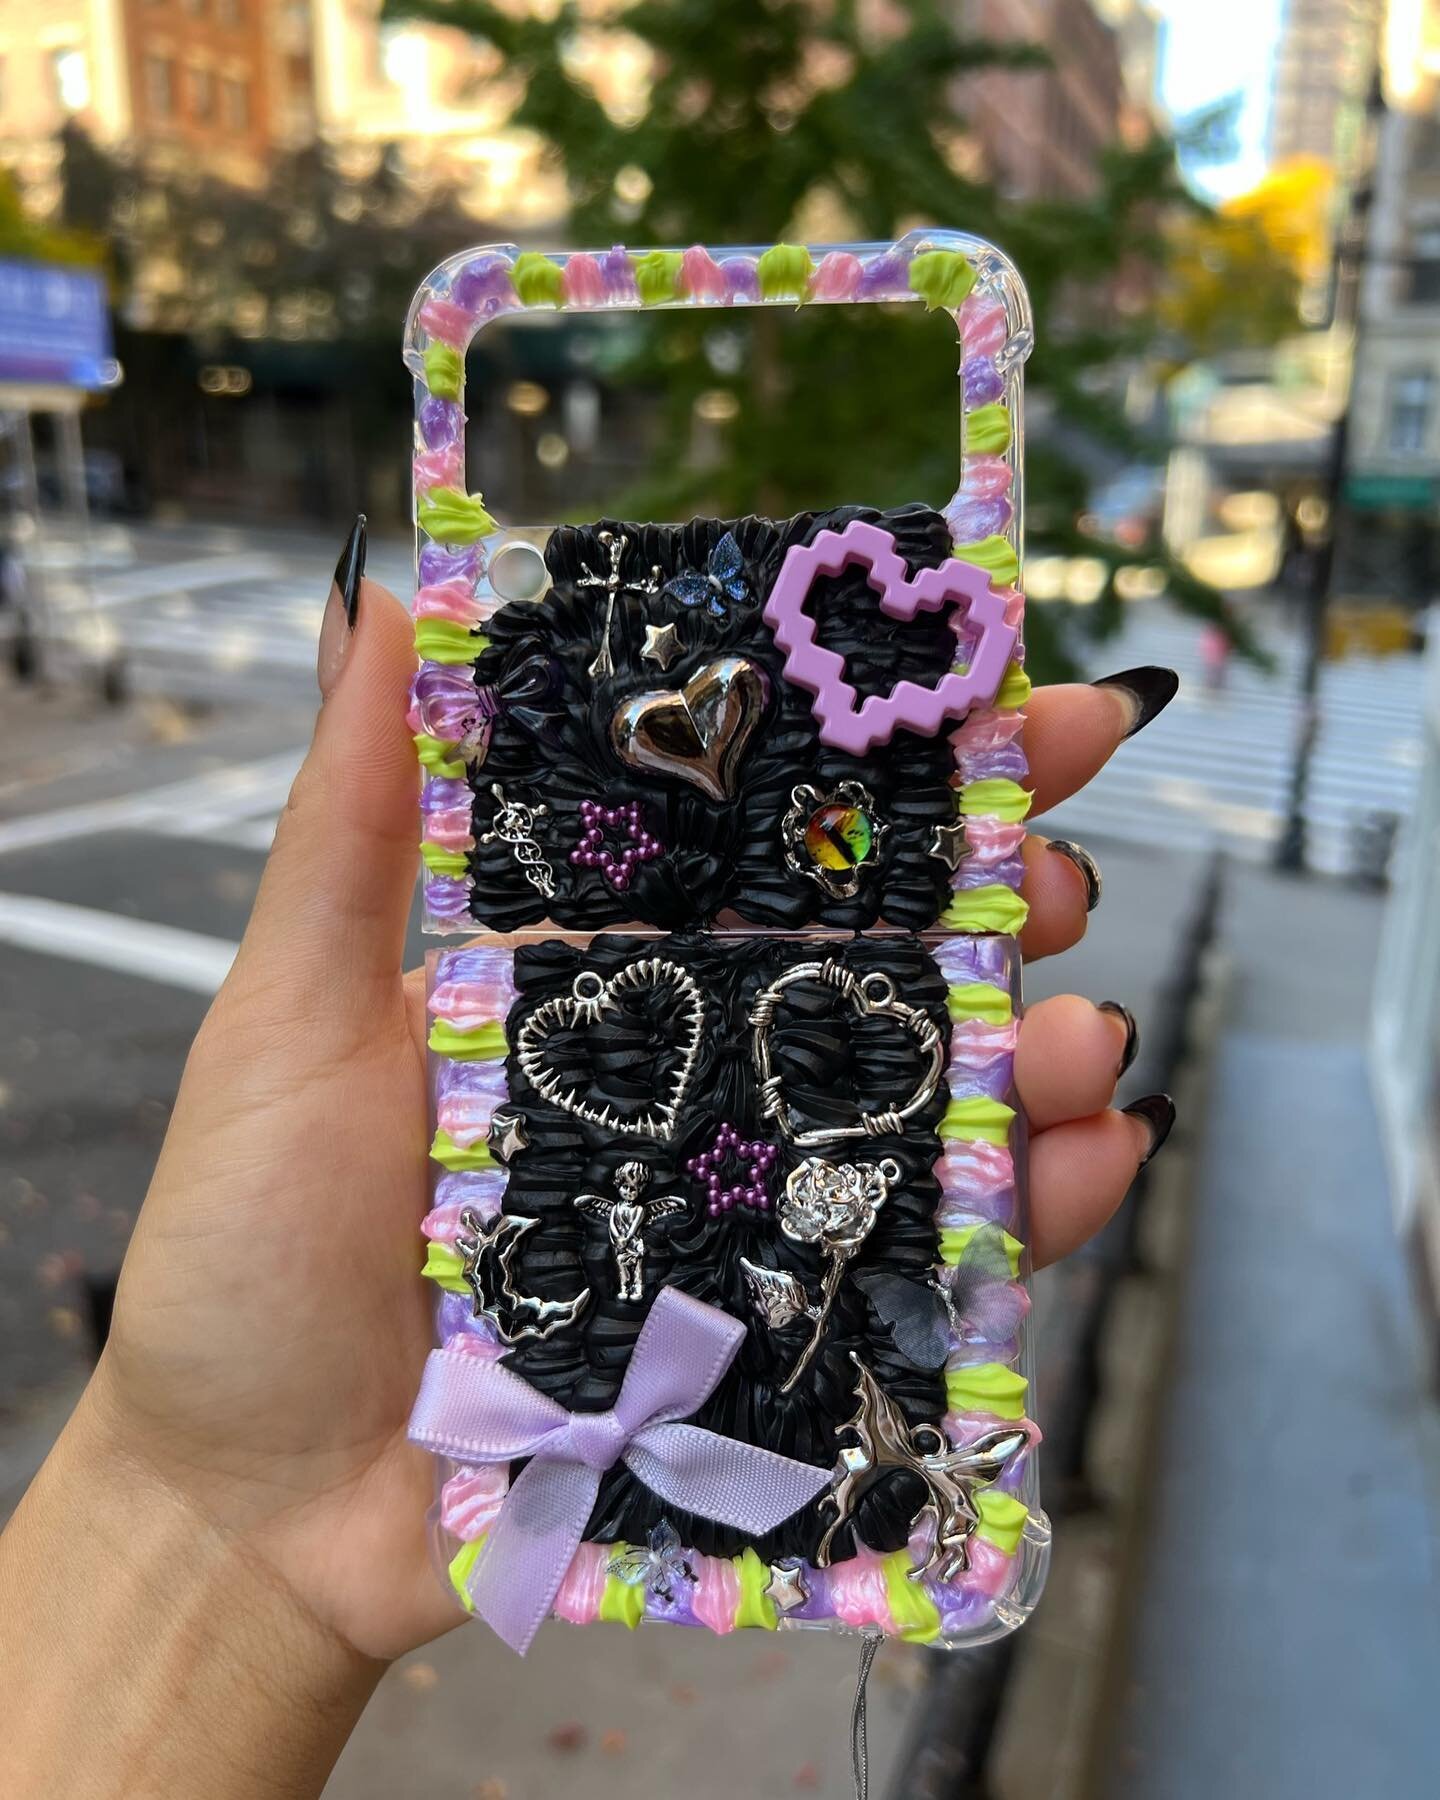 Miss being able to hang up on someone with our flip phone like *click* 💁&zwj;♀️ We made our first custom case for a flip phone &amp; it was soooo much fun XD
.
.
.
.
.
.
.

#handmade #handmadephonecase #decoden #decodenphonecase #sonnyangel #sonnyan